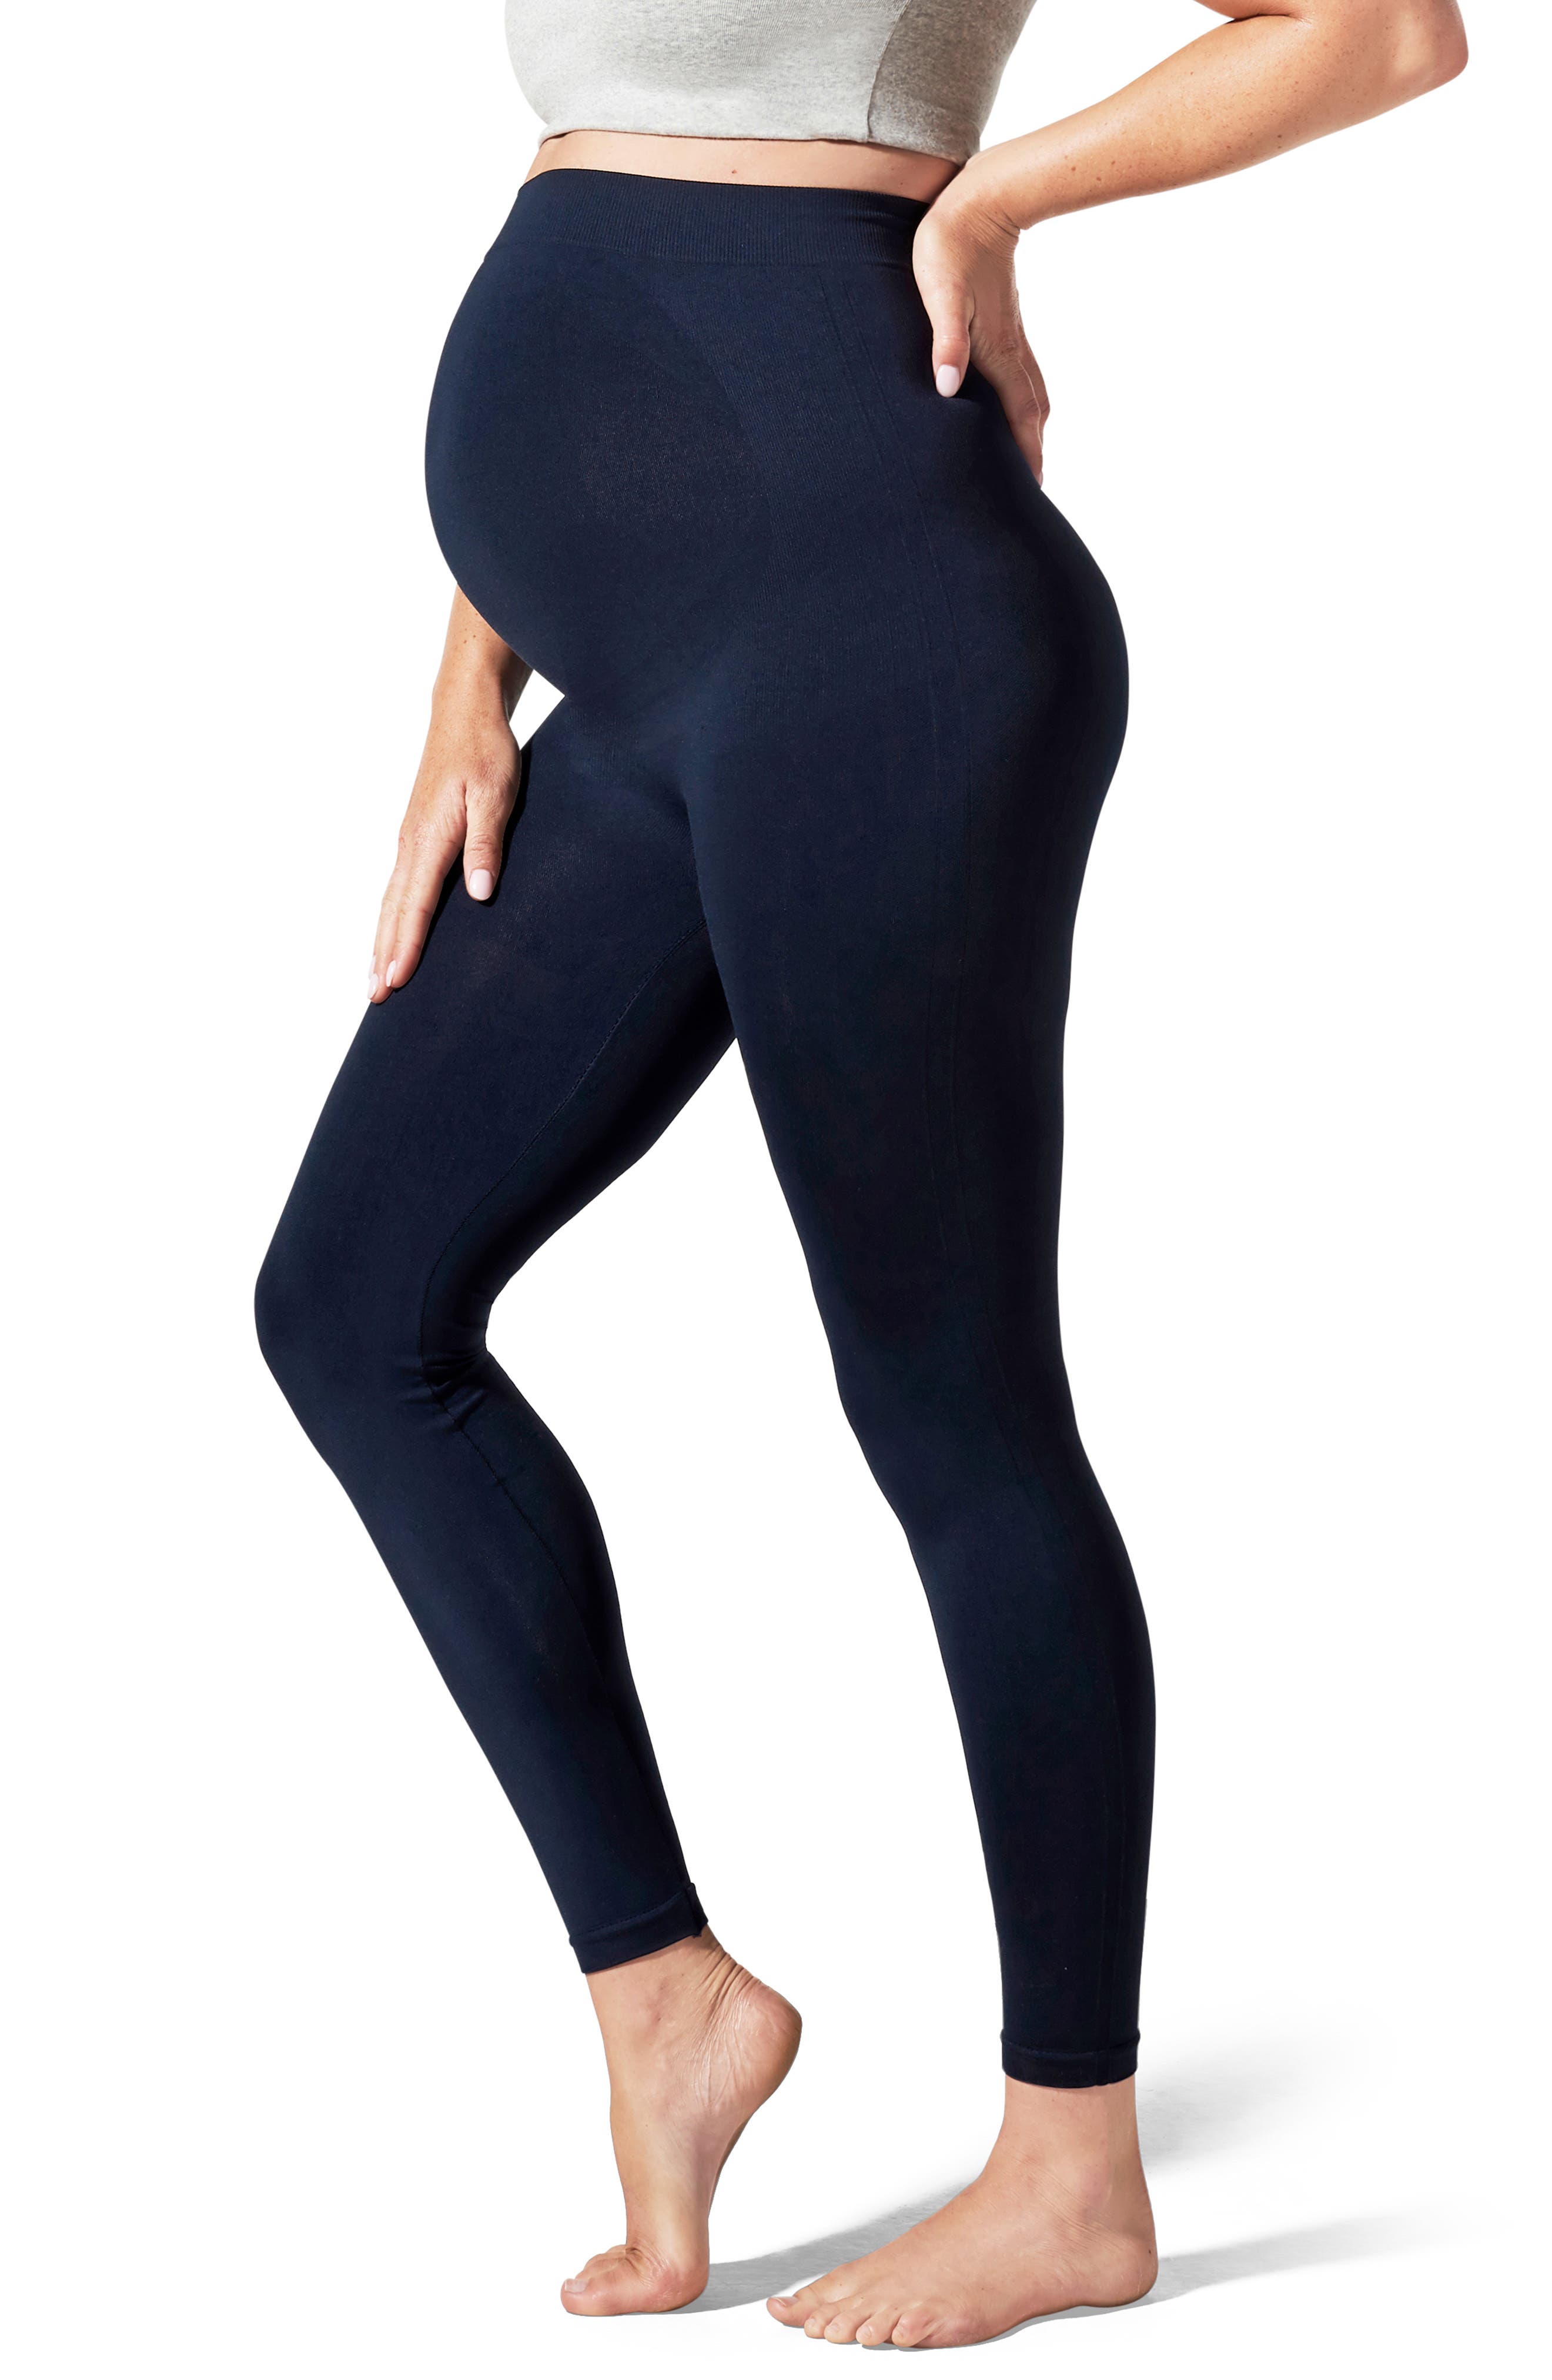 Blanqi Maternity Belly Support Skinny Jeans in Black 6